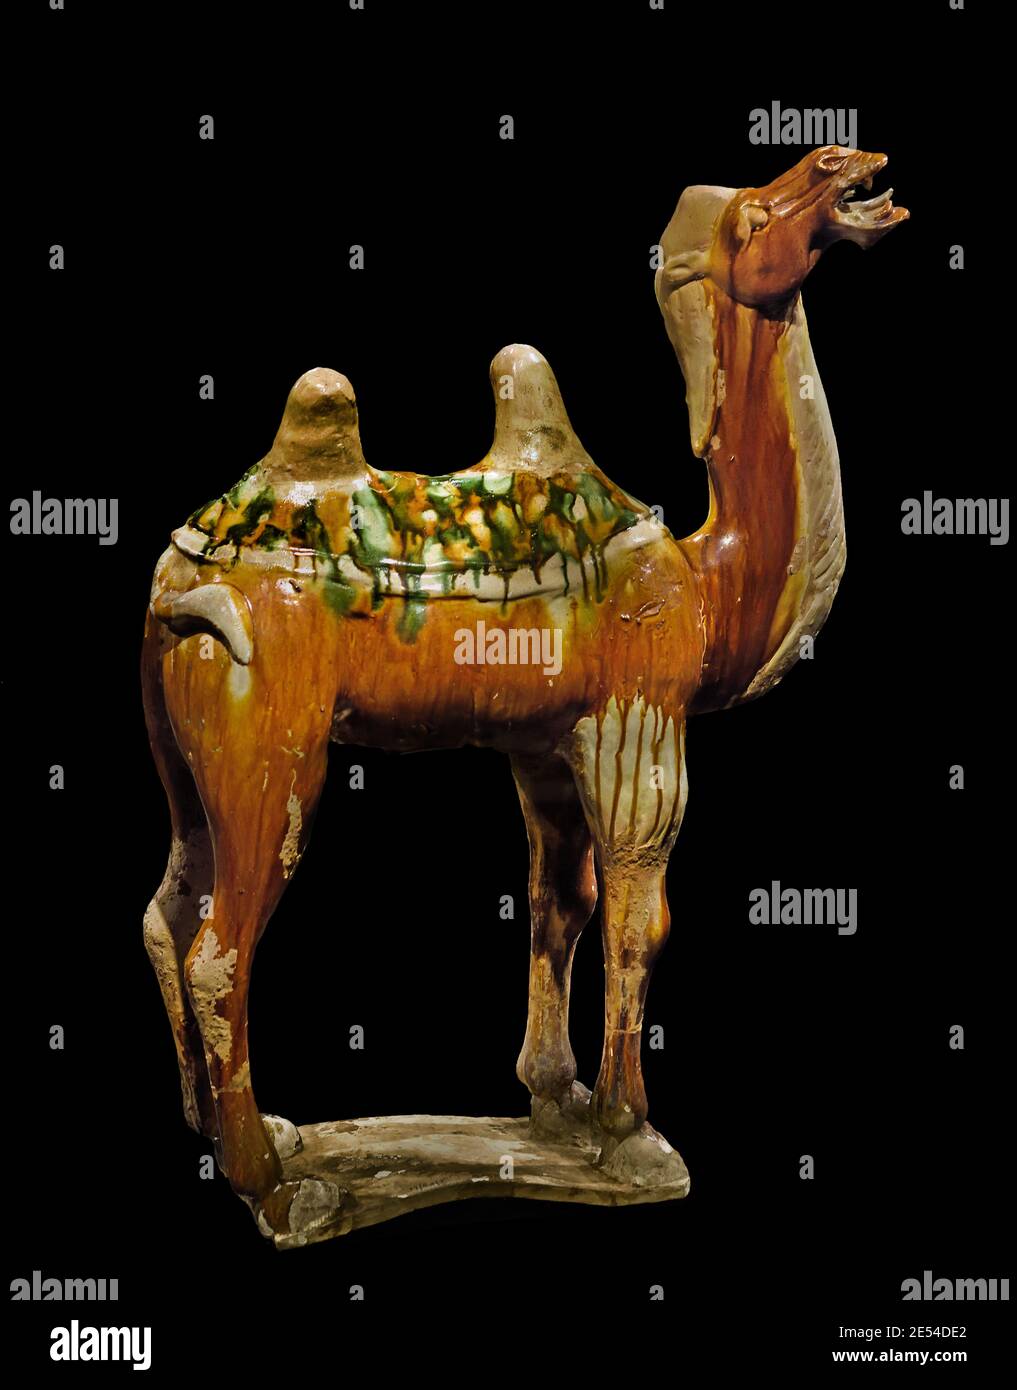 Alamy images - photography hi-res Camel master and stock